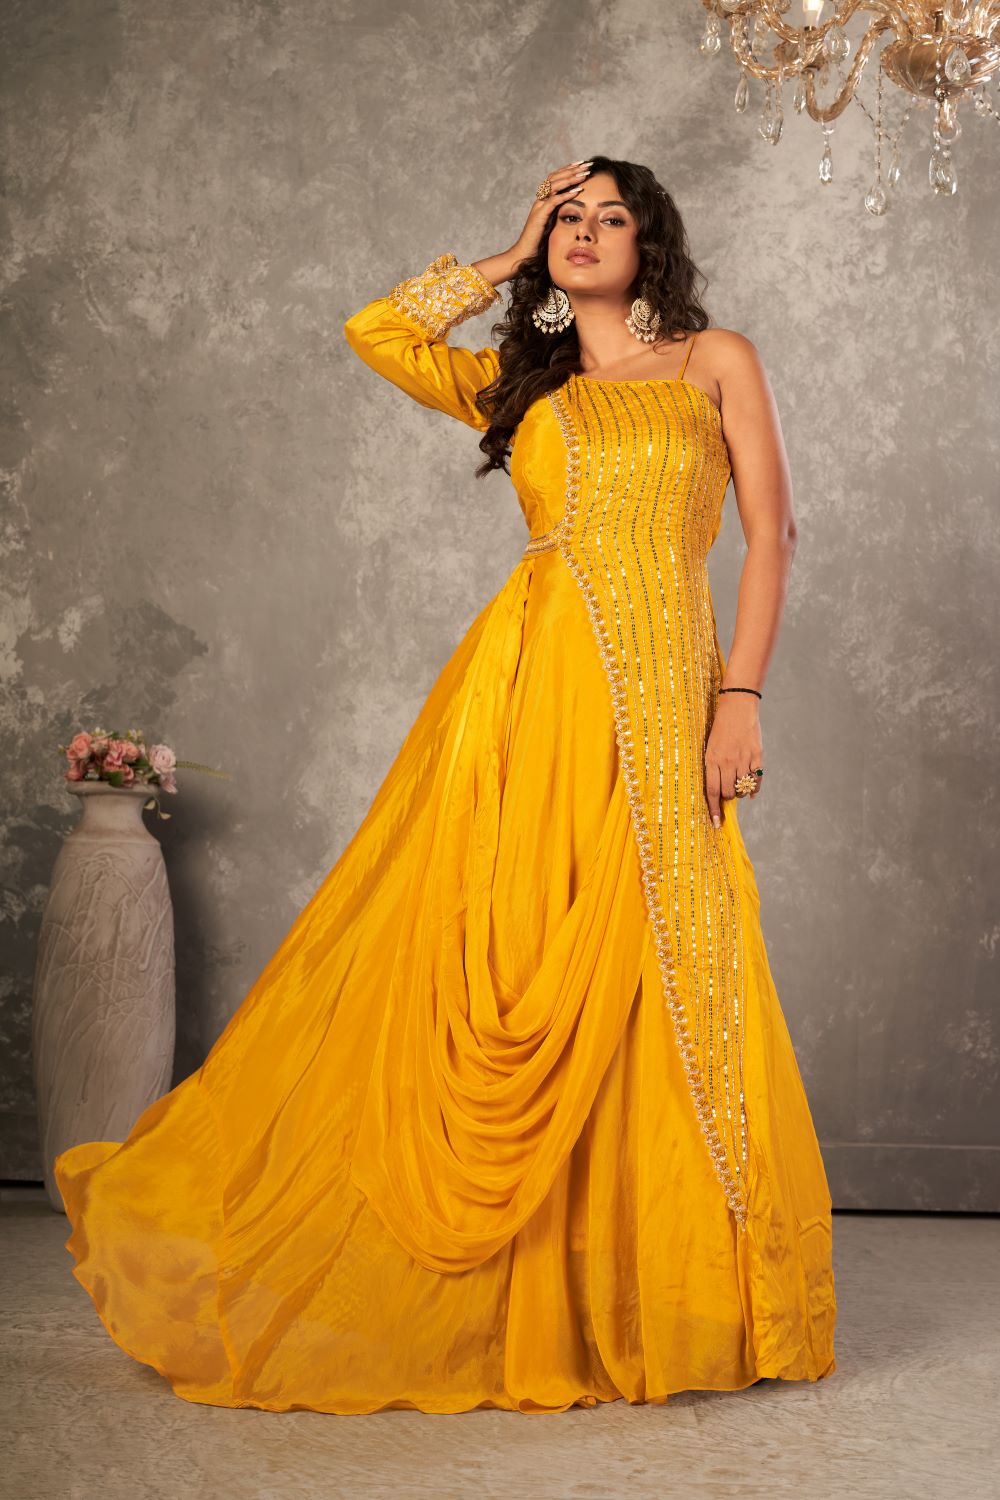 Golden Elegance: One-Sided Sleeve Yellow Georgette Gown